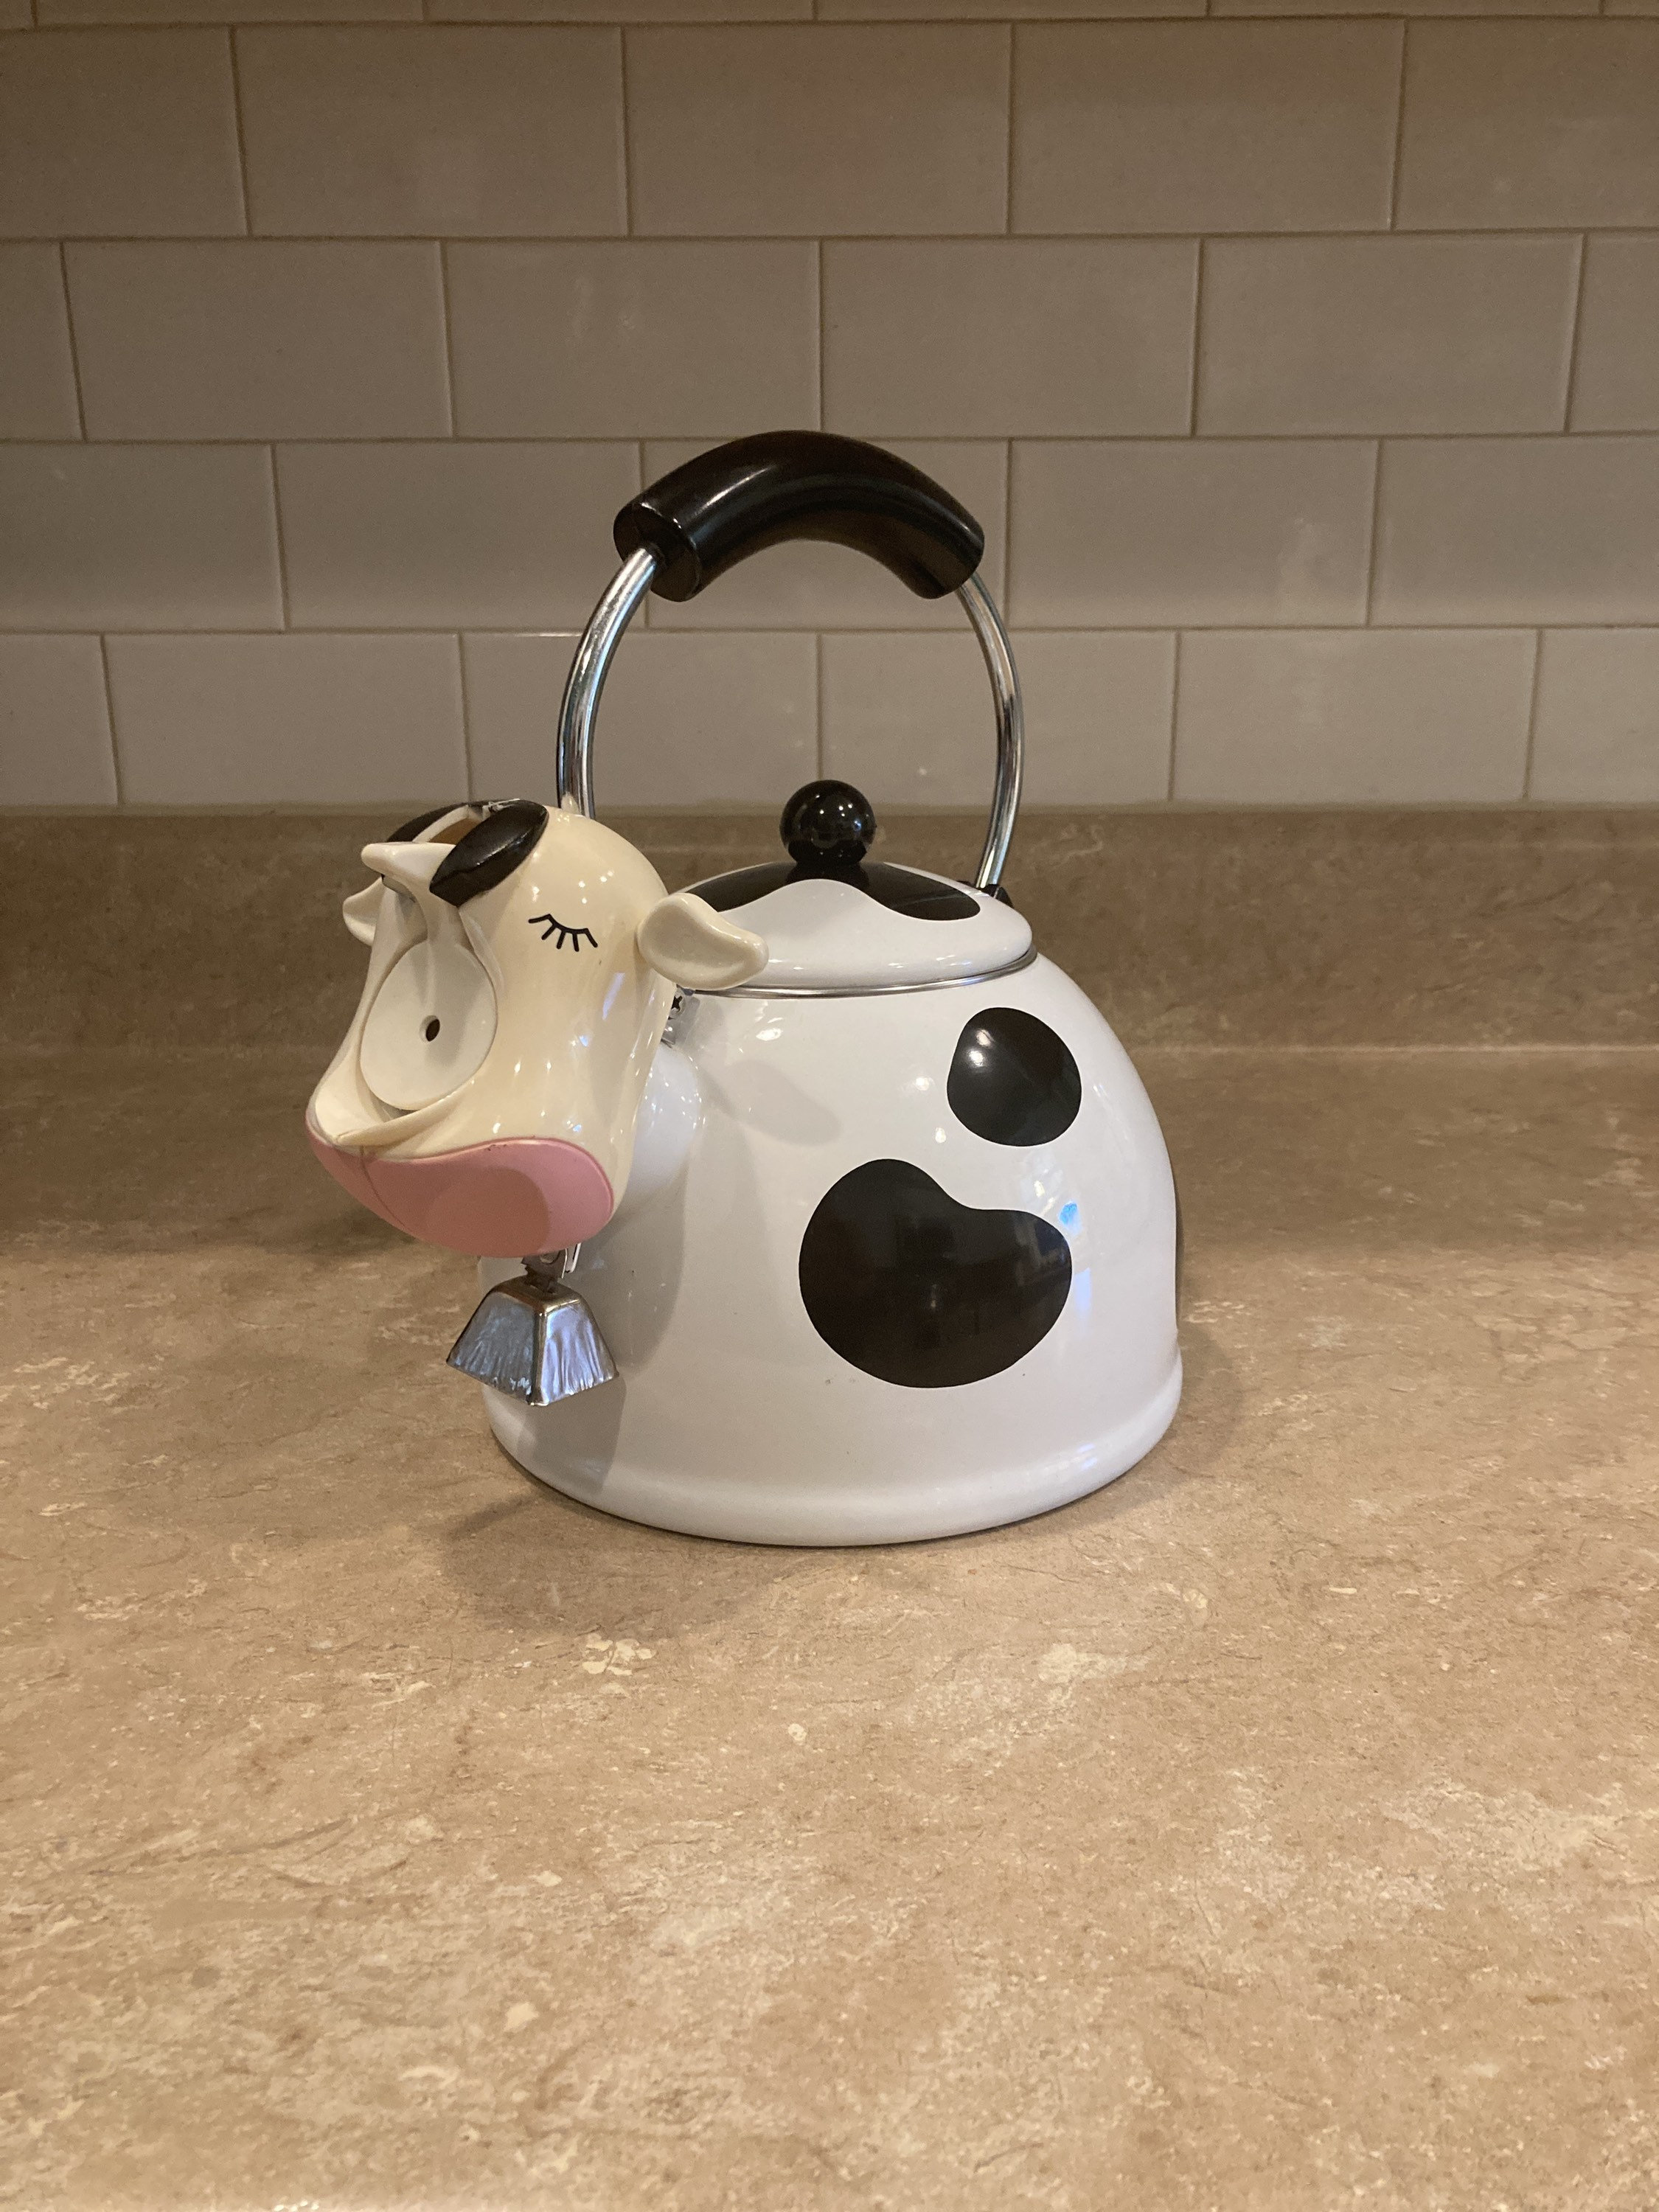 Cow Whistling Tea Kettle, Cute Animal Teapot, Kitchen Accessories